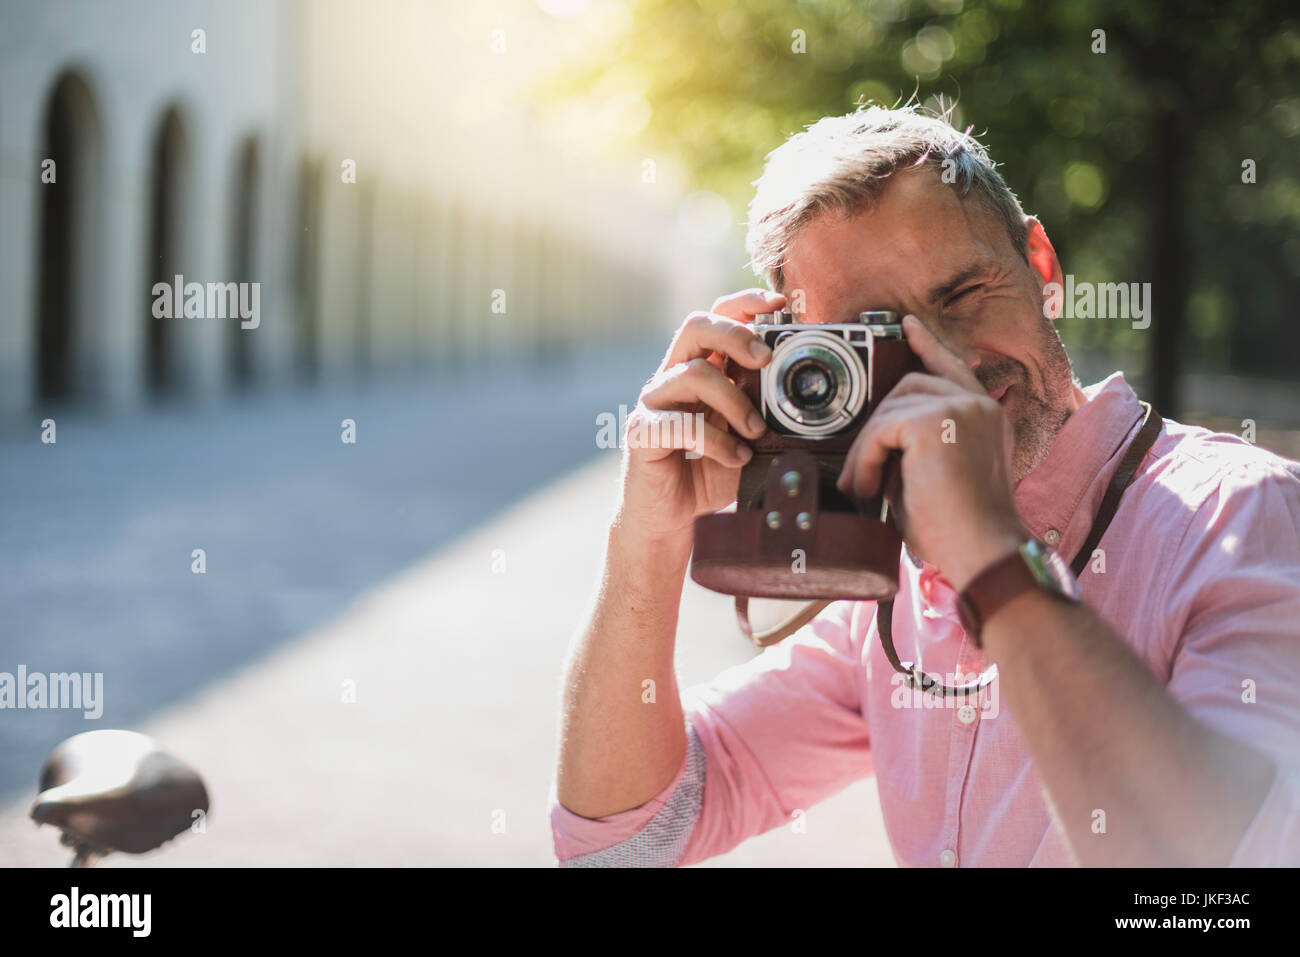 Man taking pictures with an old-fashioned camera in a park Stock Photo